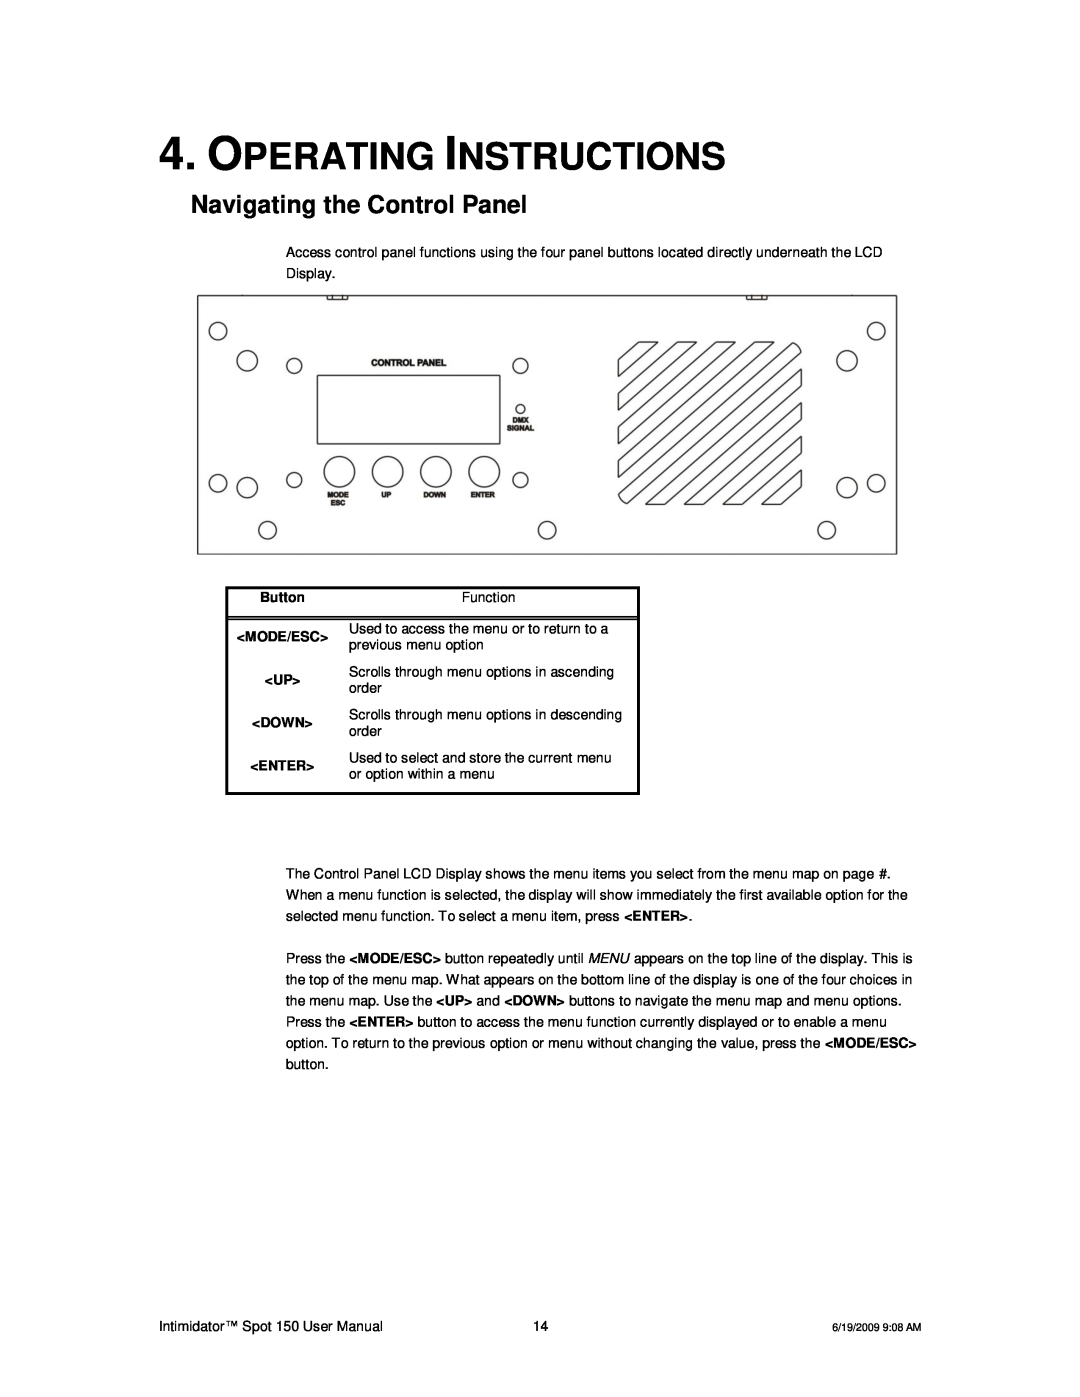 Chauvet 150 user manual Operating Instructions, Navigating the Control Panel 